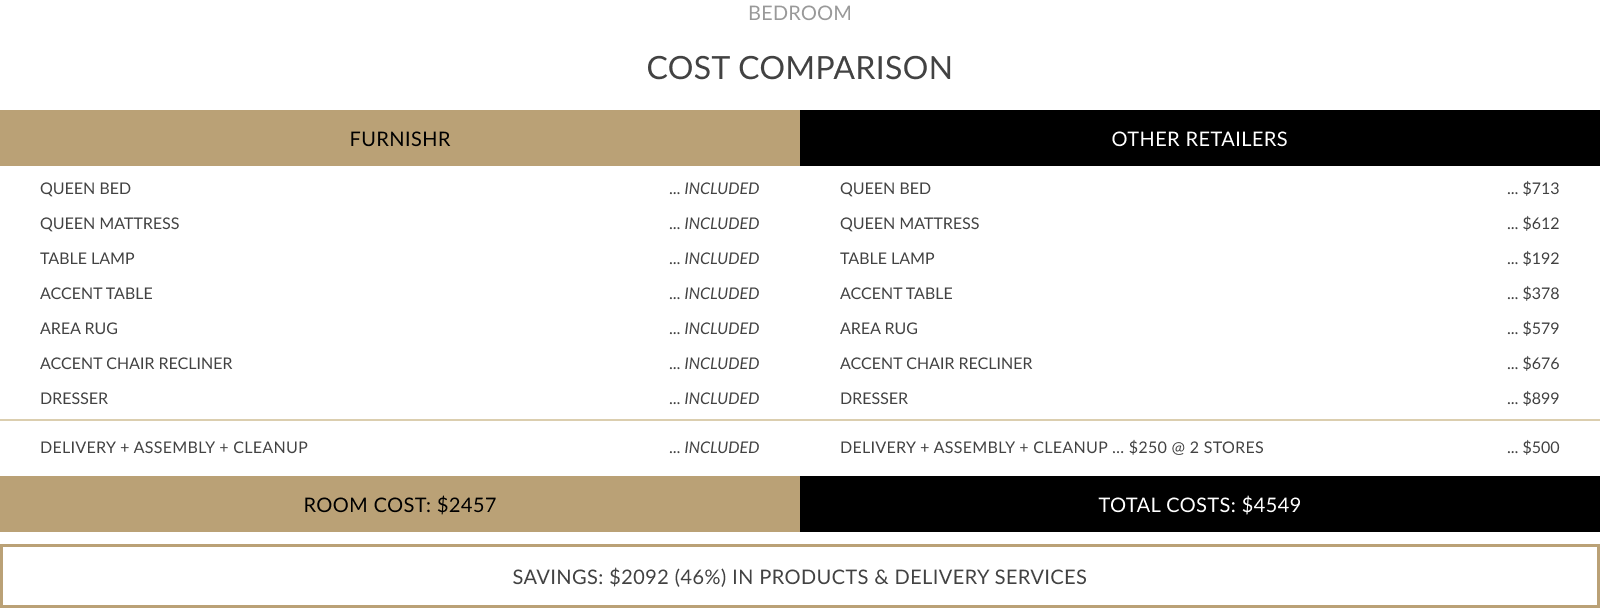 Cost of furnishing bedroom comparison between Furnishr and typical retailers